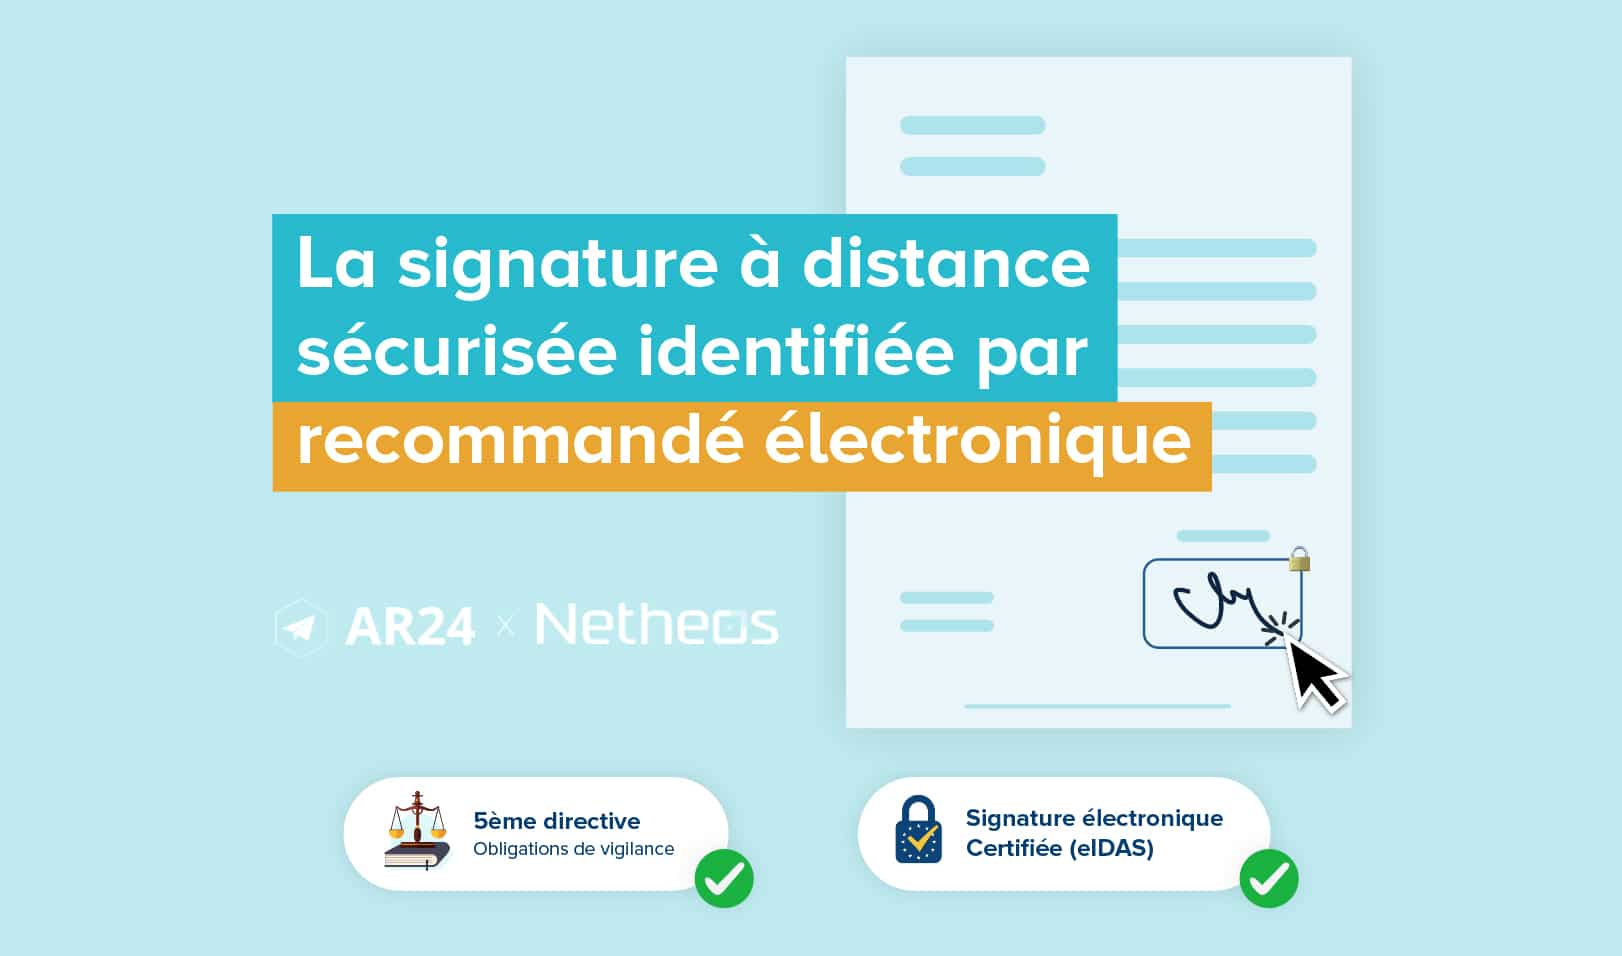 AR24 and Netheos innovate with secure remote signature